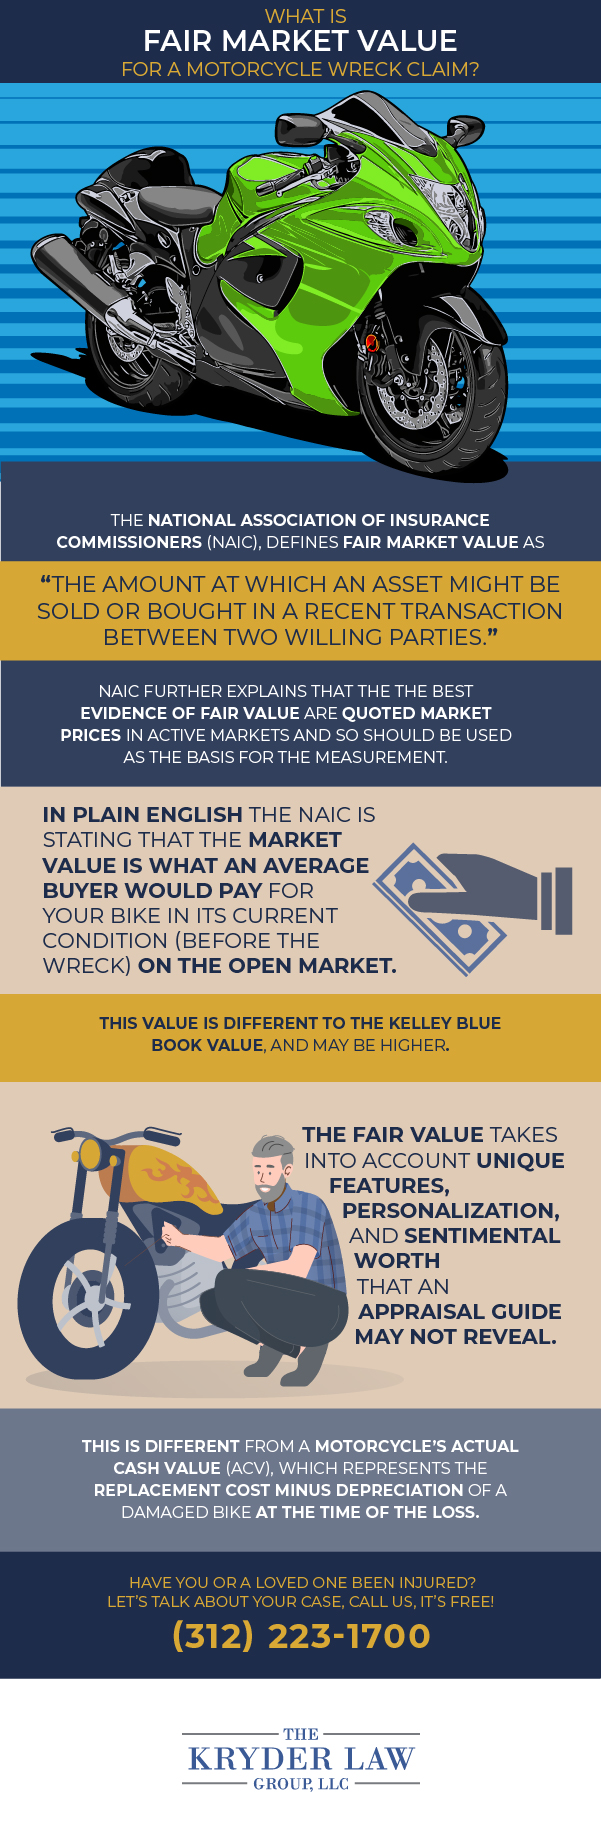 What Is Fair Market Value For A Motorcycle Wreck Claim? Infographic